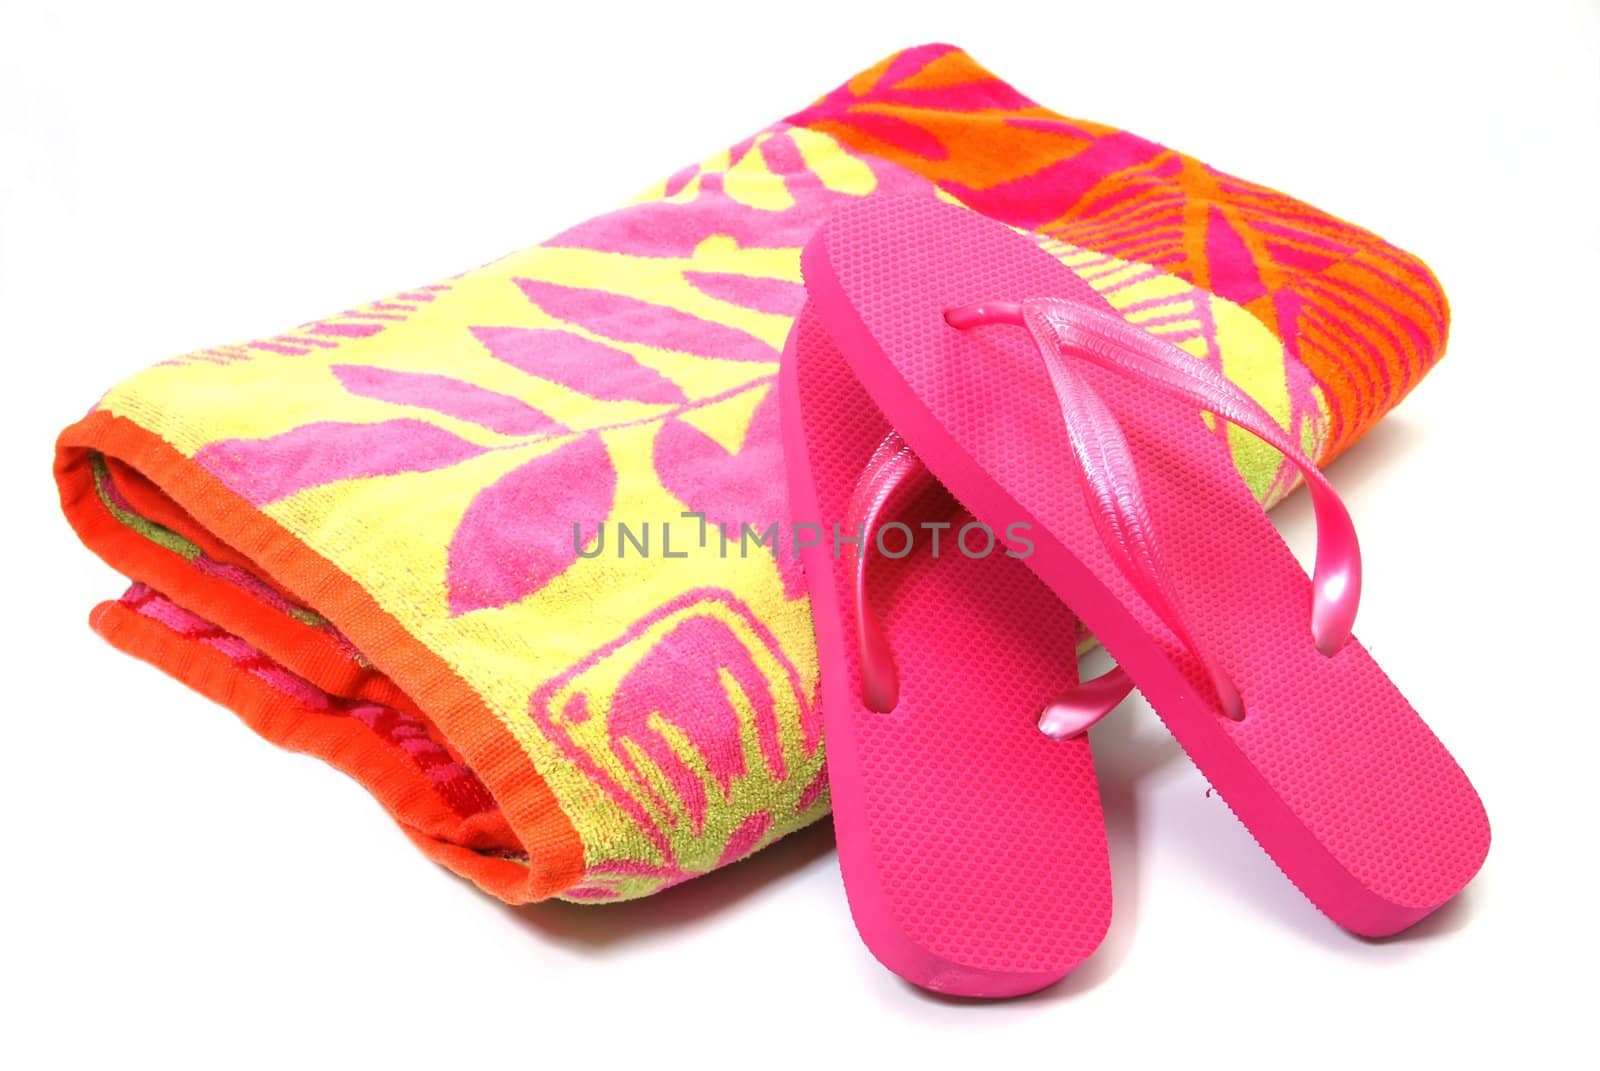 Beach towel and flip flops isolated on white background.